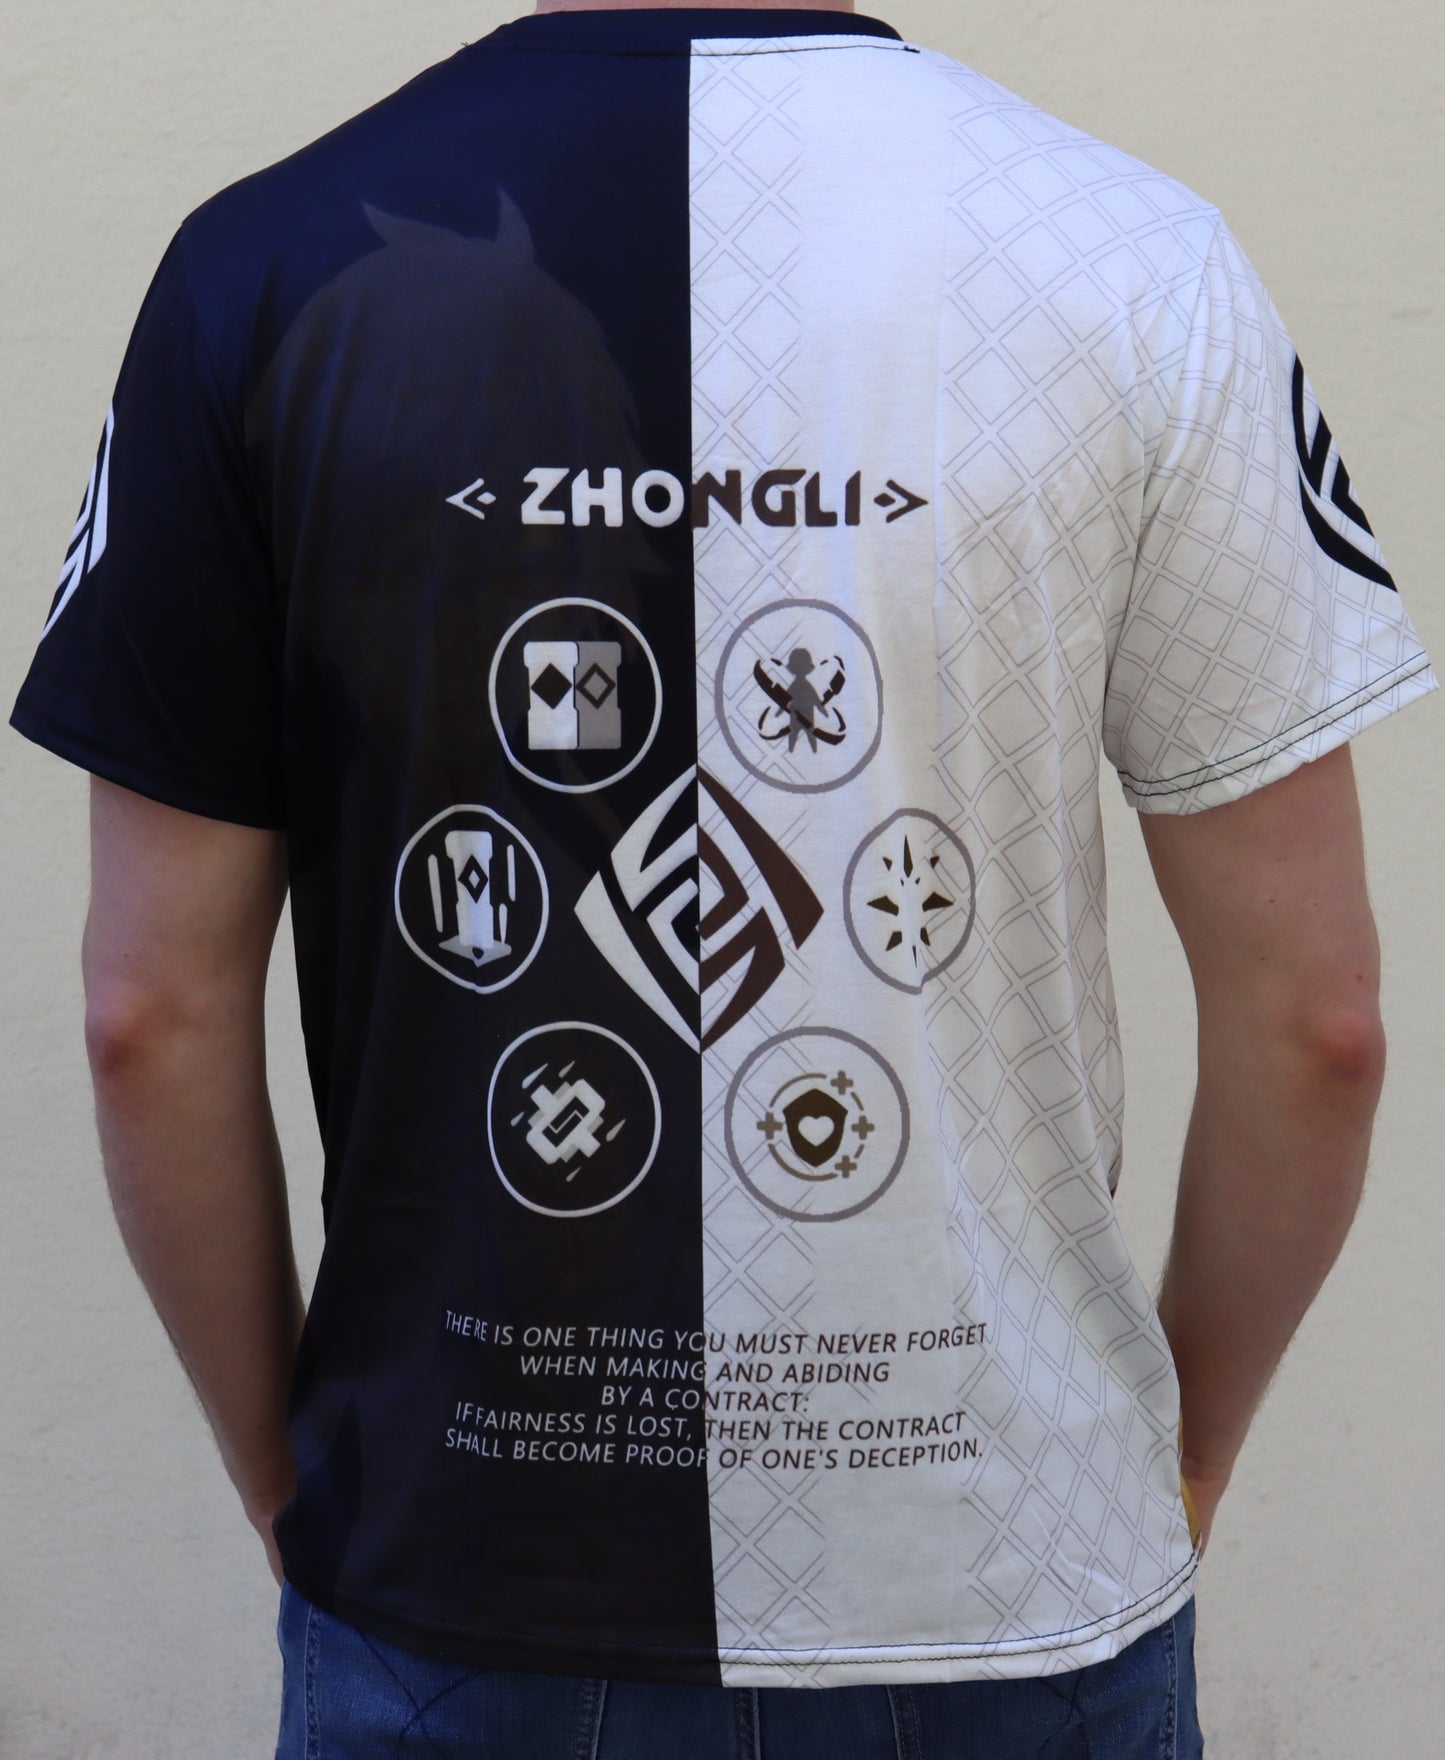 Genshin Impact - Zhongli Black and White Variant TShirt (Price Does Not Include Shipping- - Please Read Description)